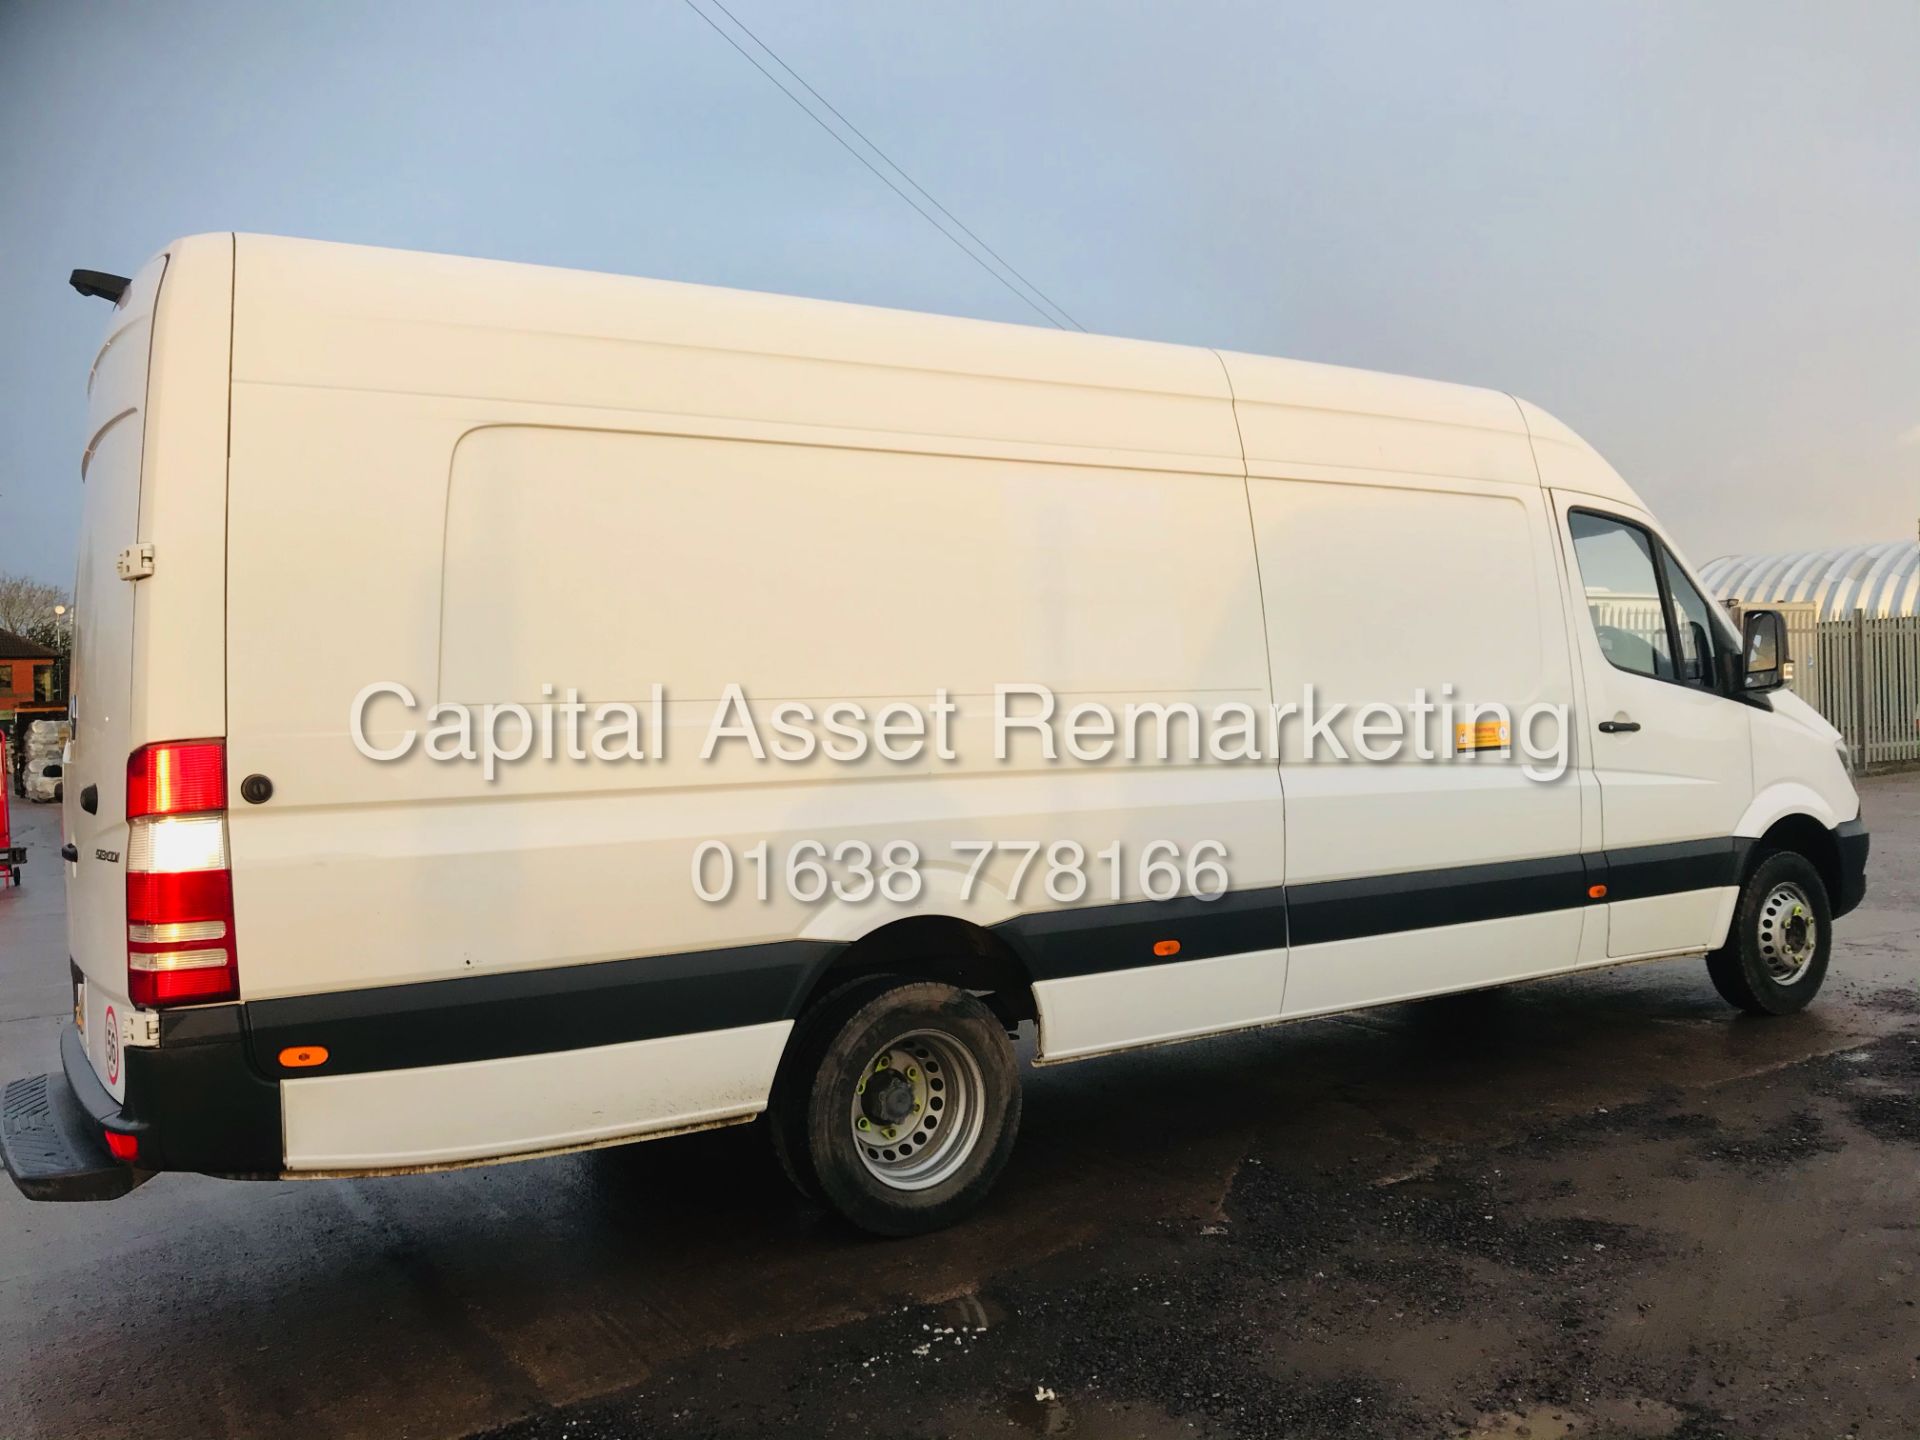 (On Sale) MERCEDES SPRINTER 513CDI "XLWB - TWIN REAR WHEELS" 1 OWNER (2015) *IDEAL CONVERSION* - Image 10 of 15